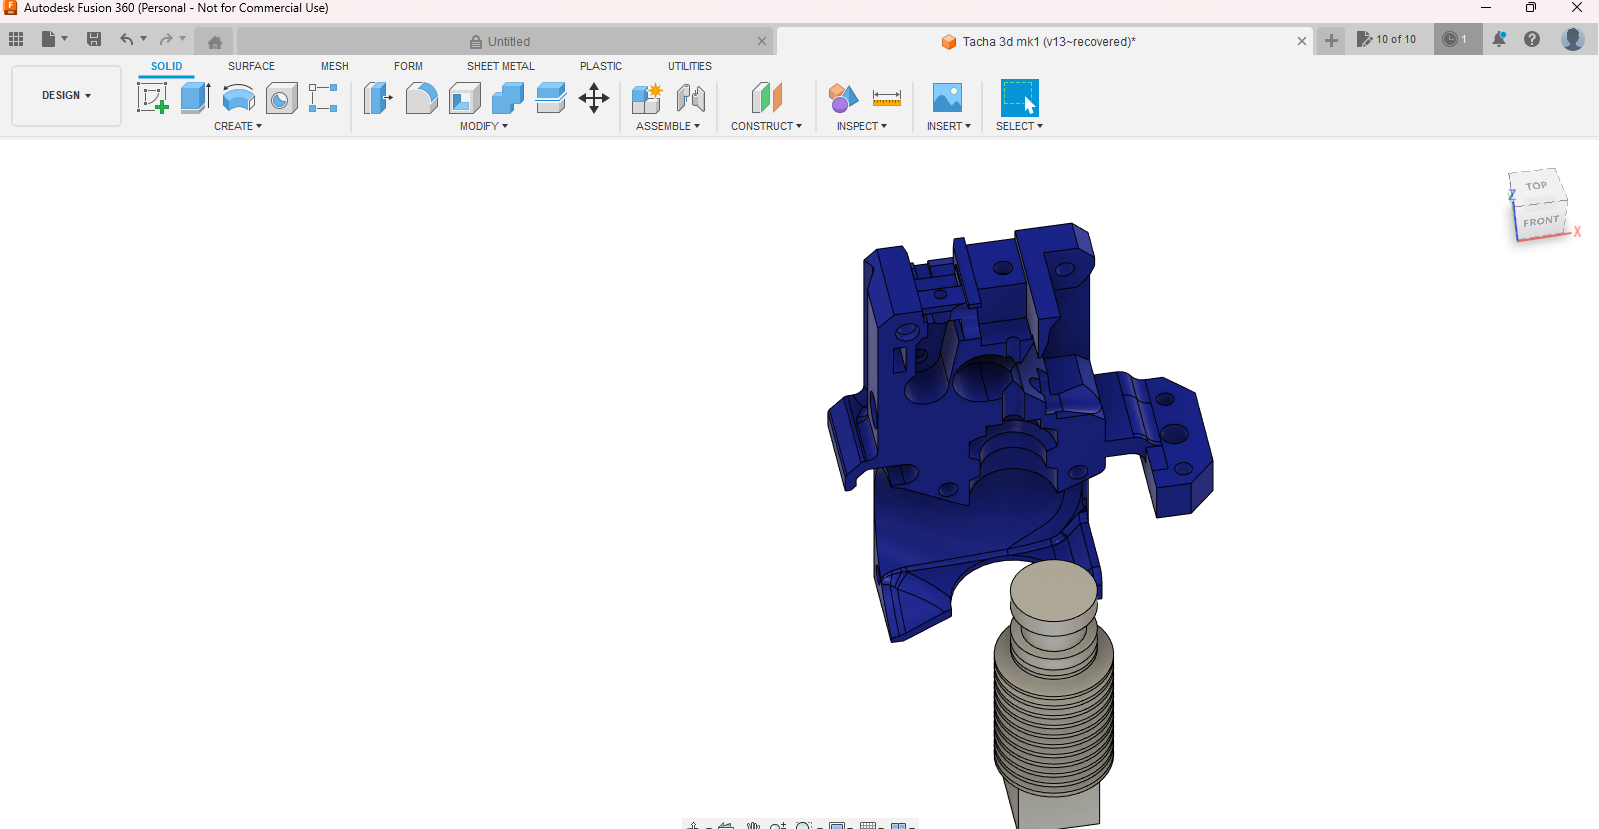 Autodesk Fusion 360 (Personal - Not for Commercial Use) 6_29_2023 10_02_47 PM.png